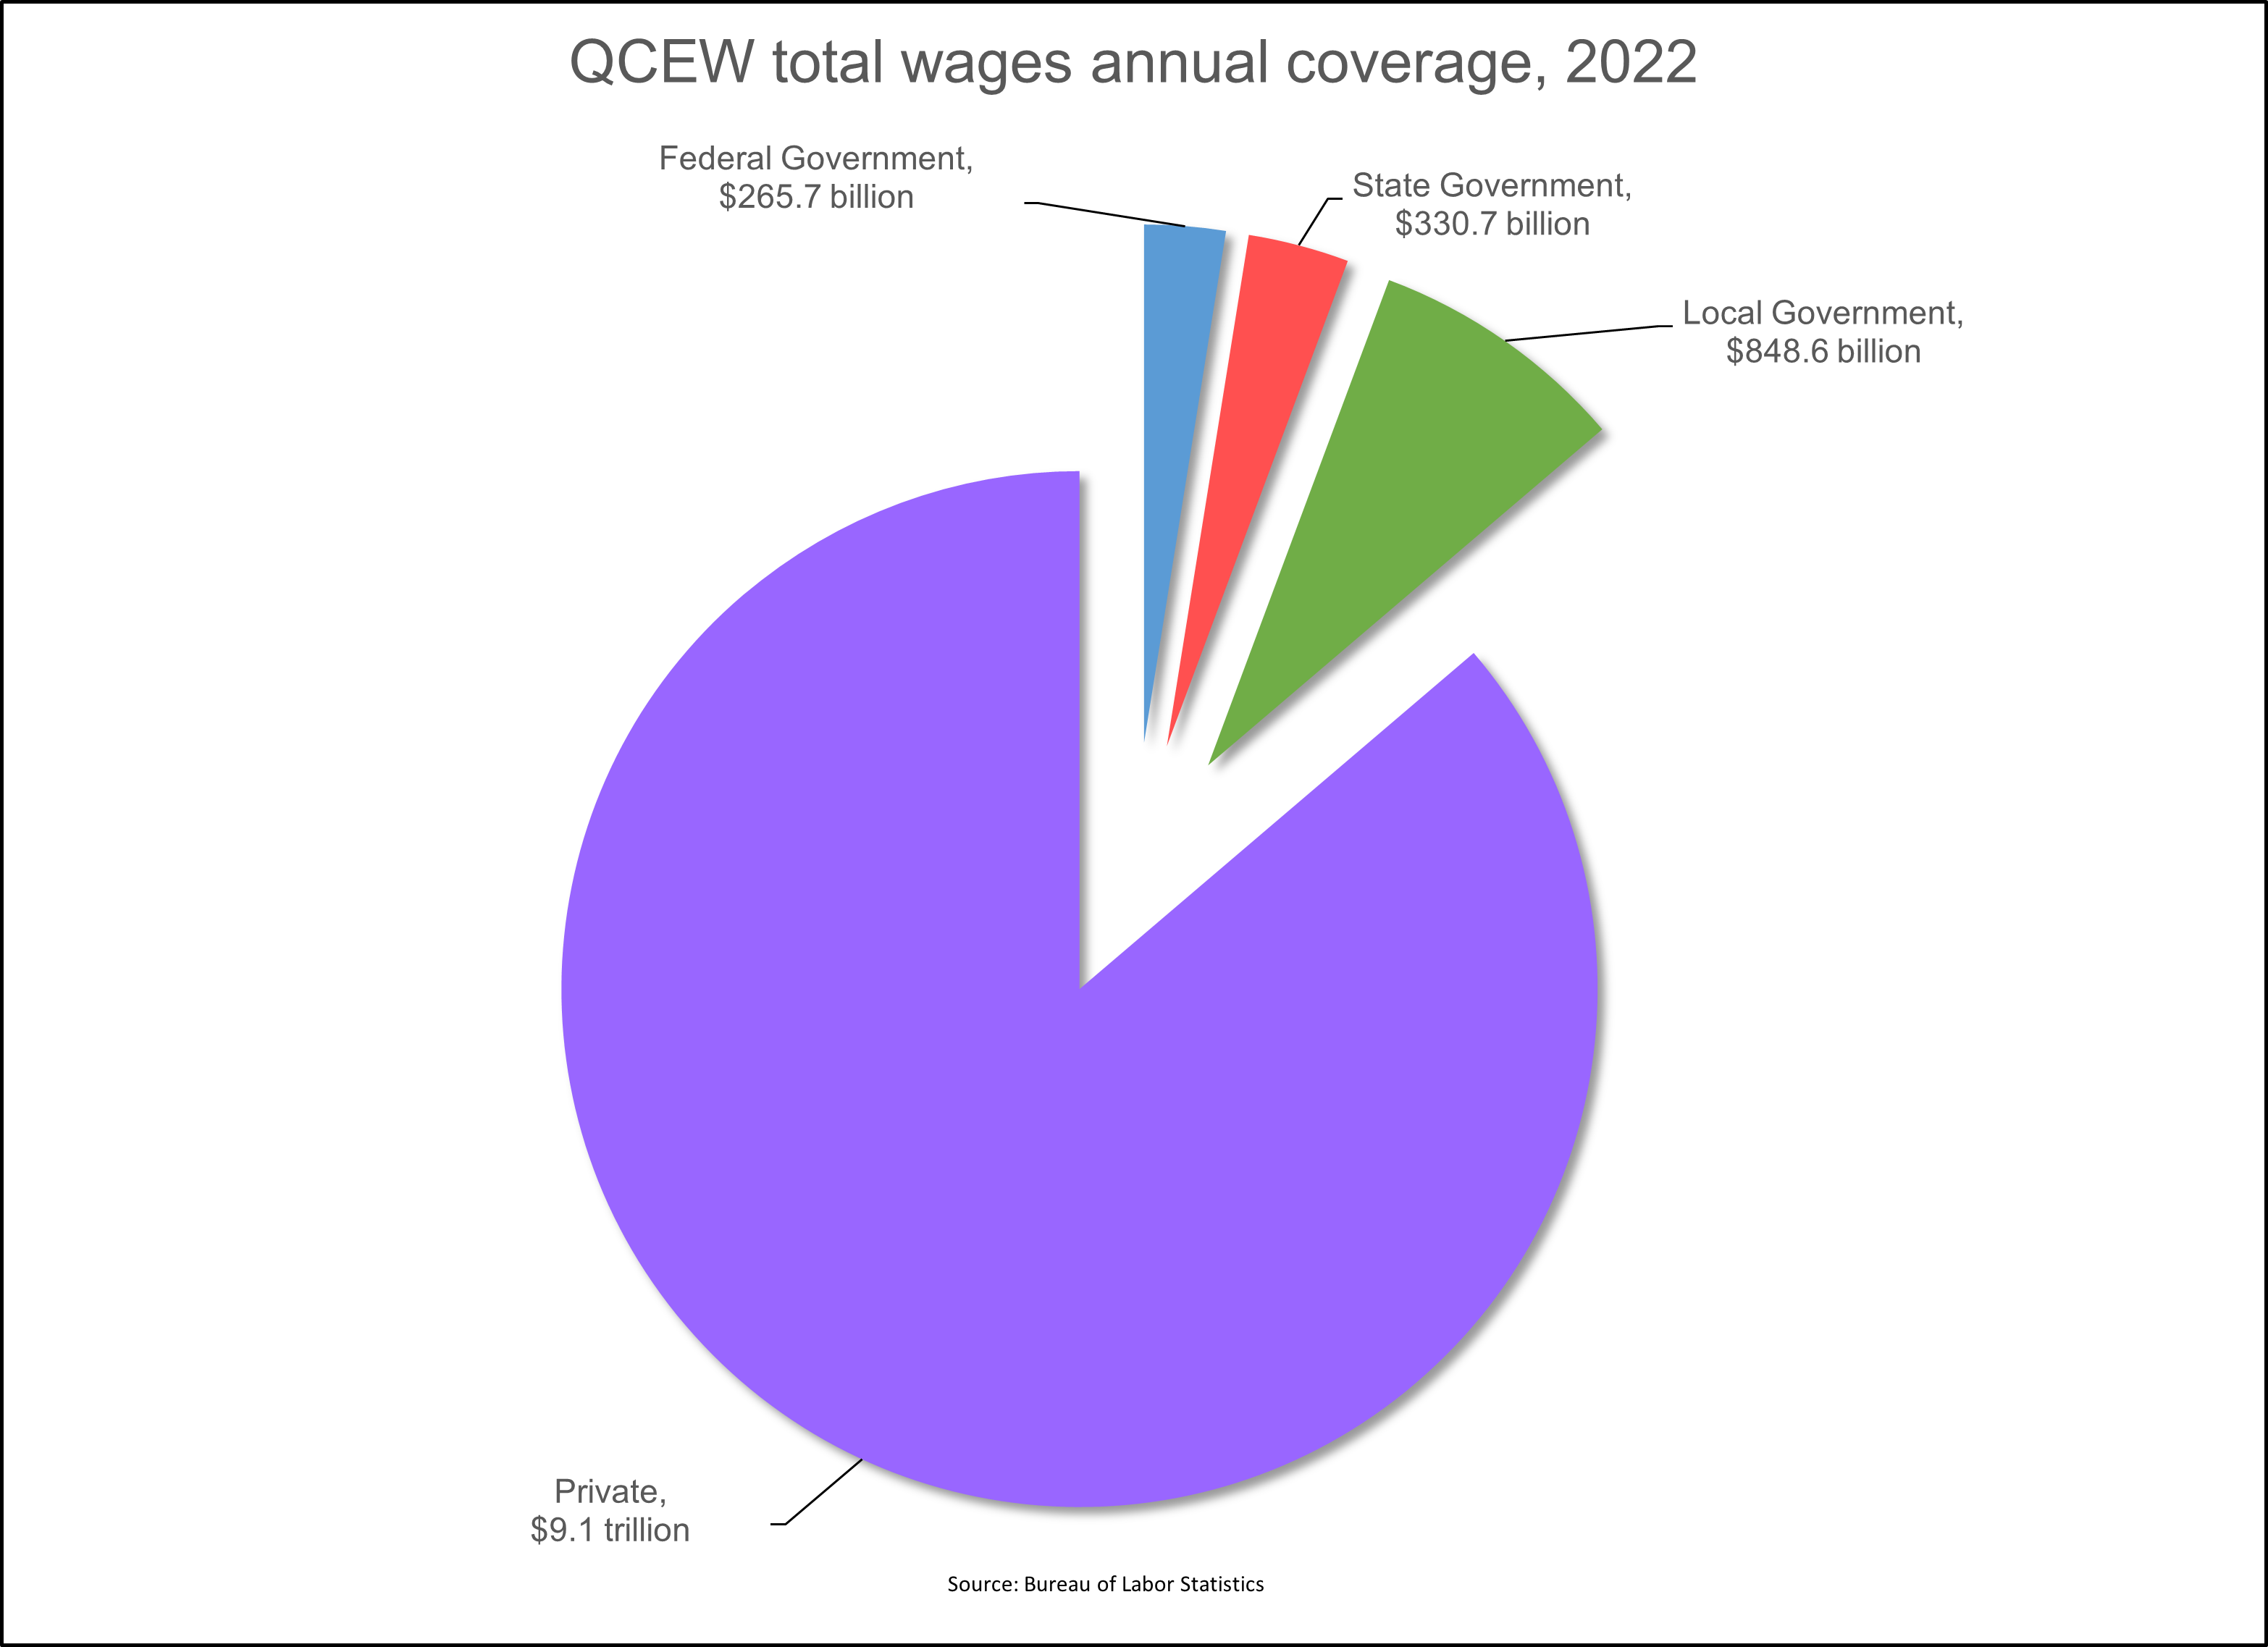 QCEW Total wages annual coverage, 2022